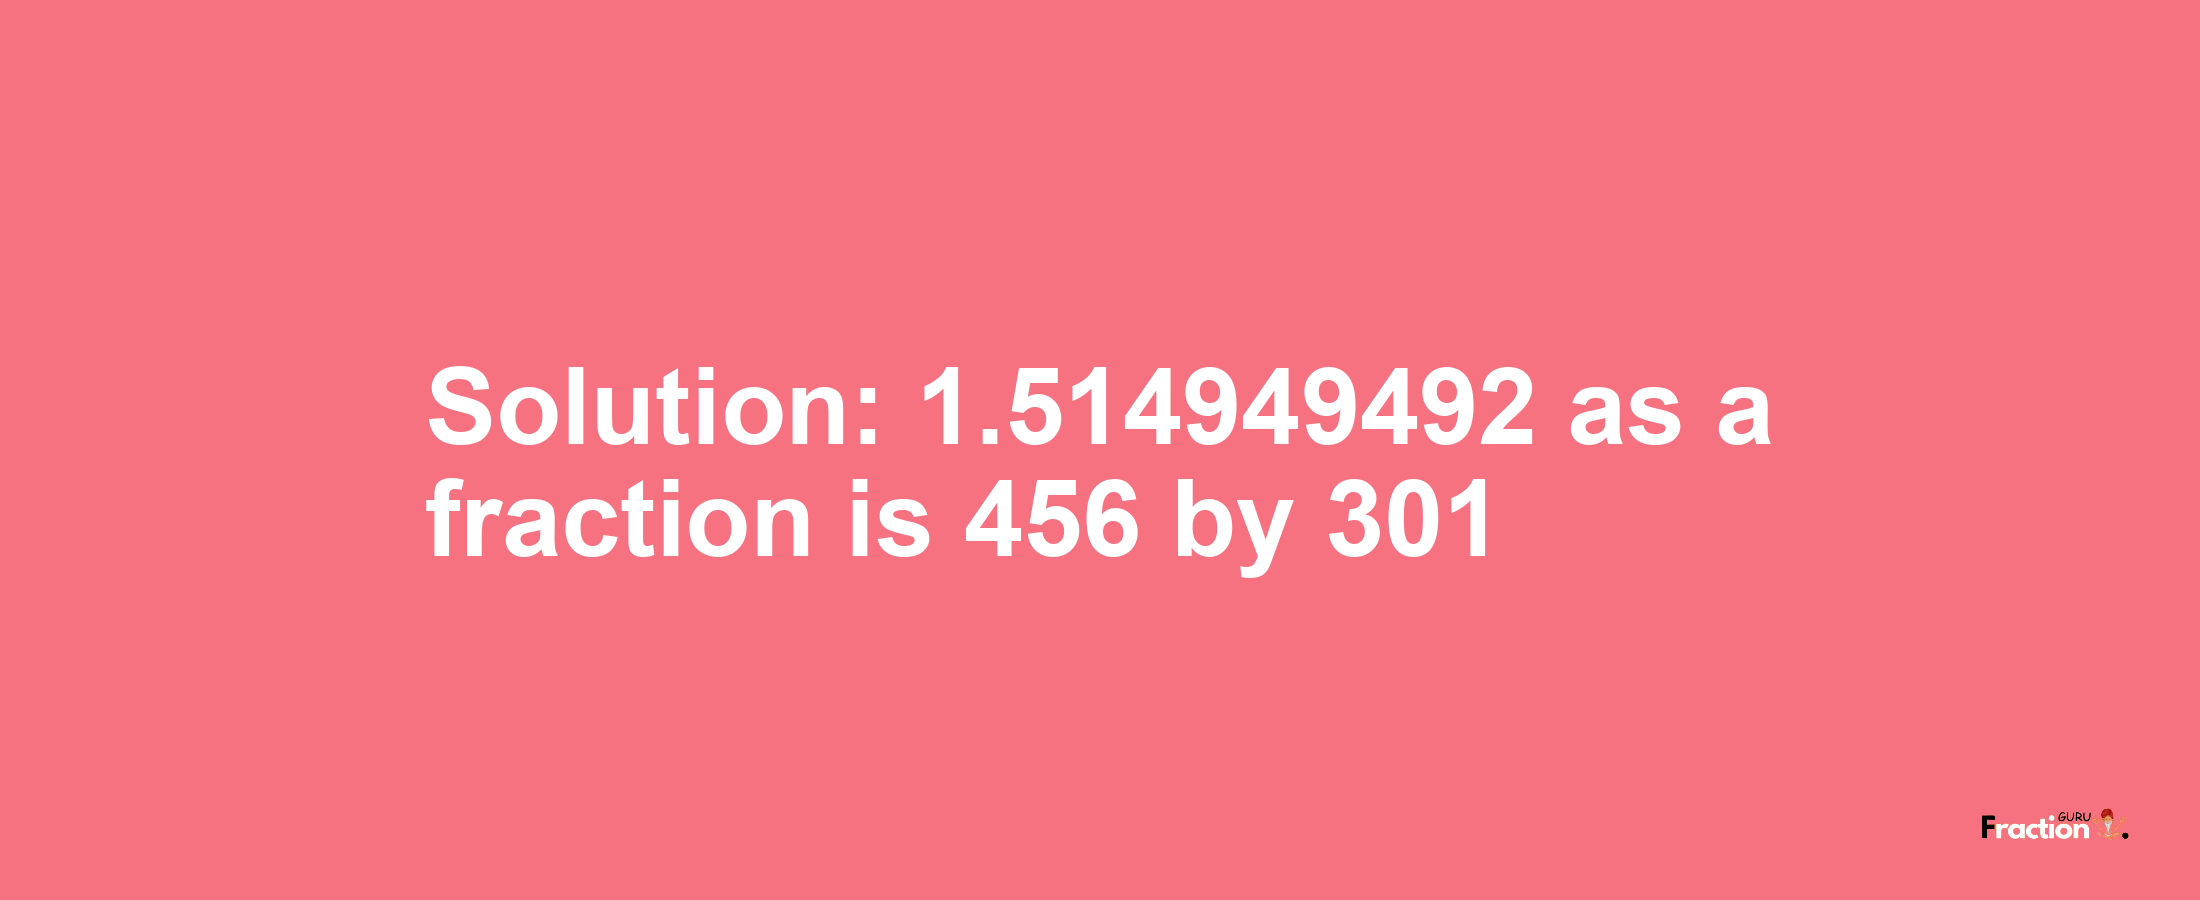 Solution:1.514949492 as a fraction is 456/301